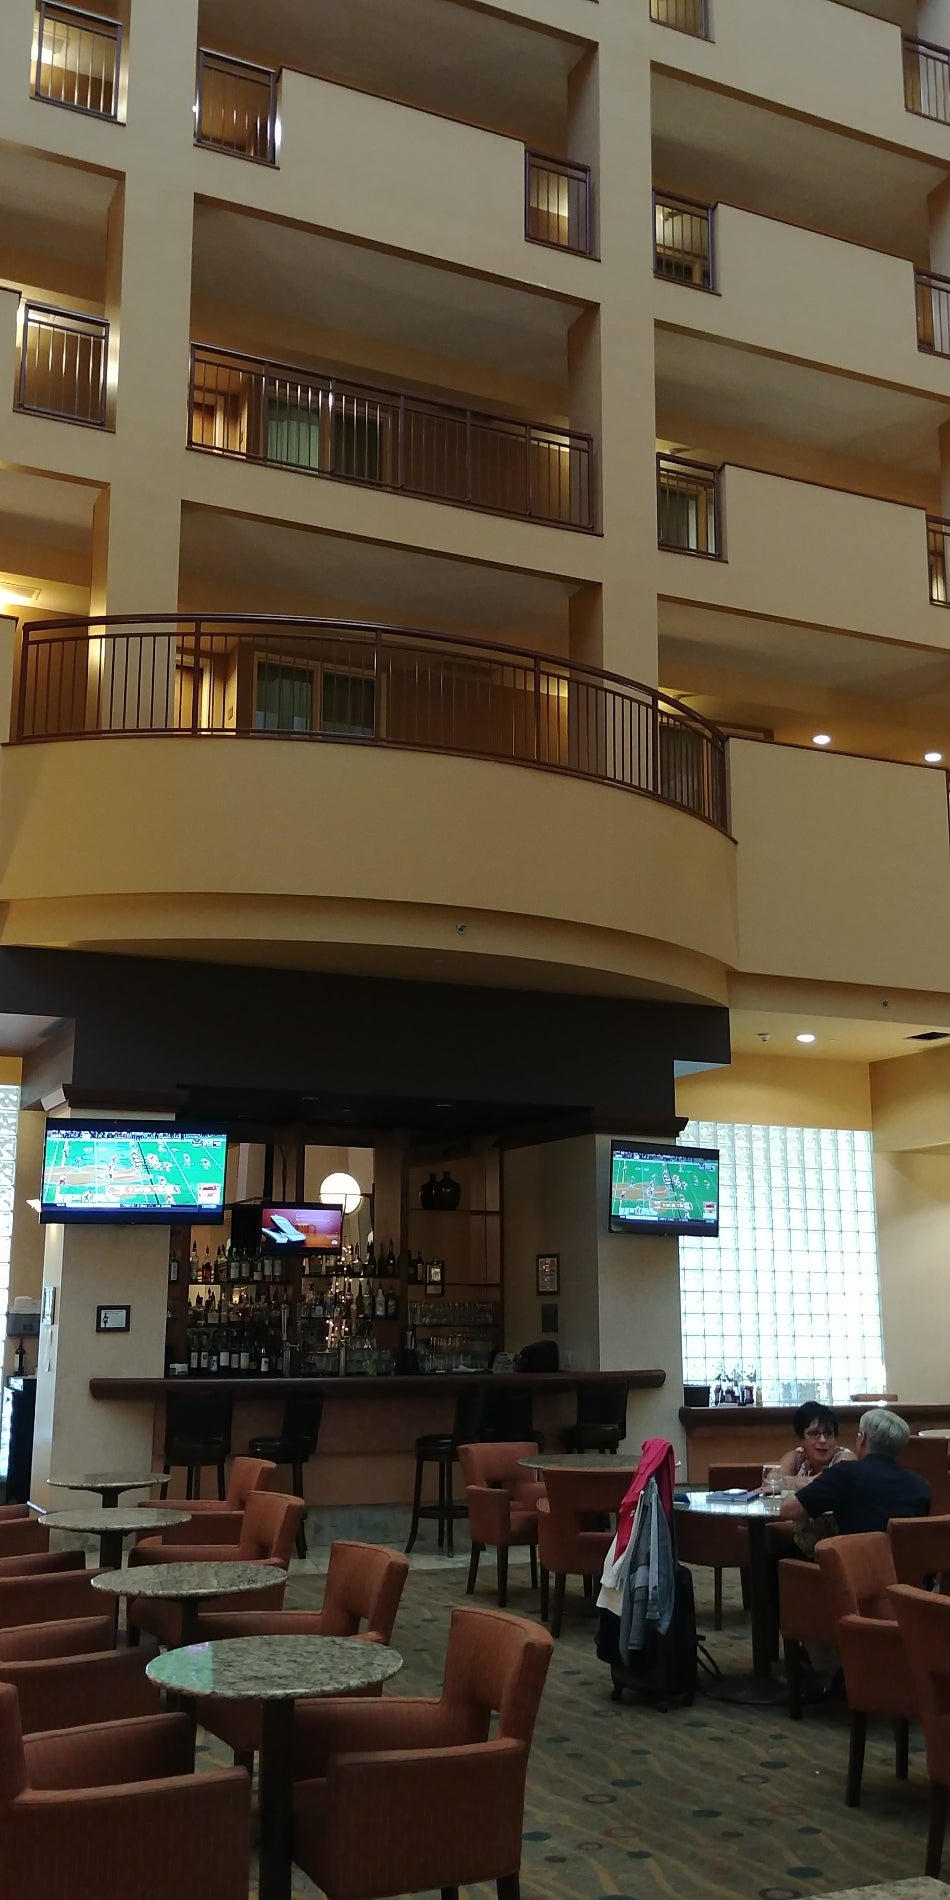 Photo of Embassy Suites